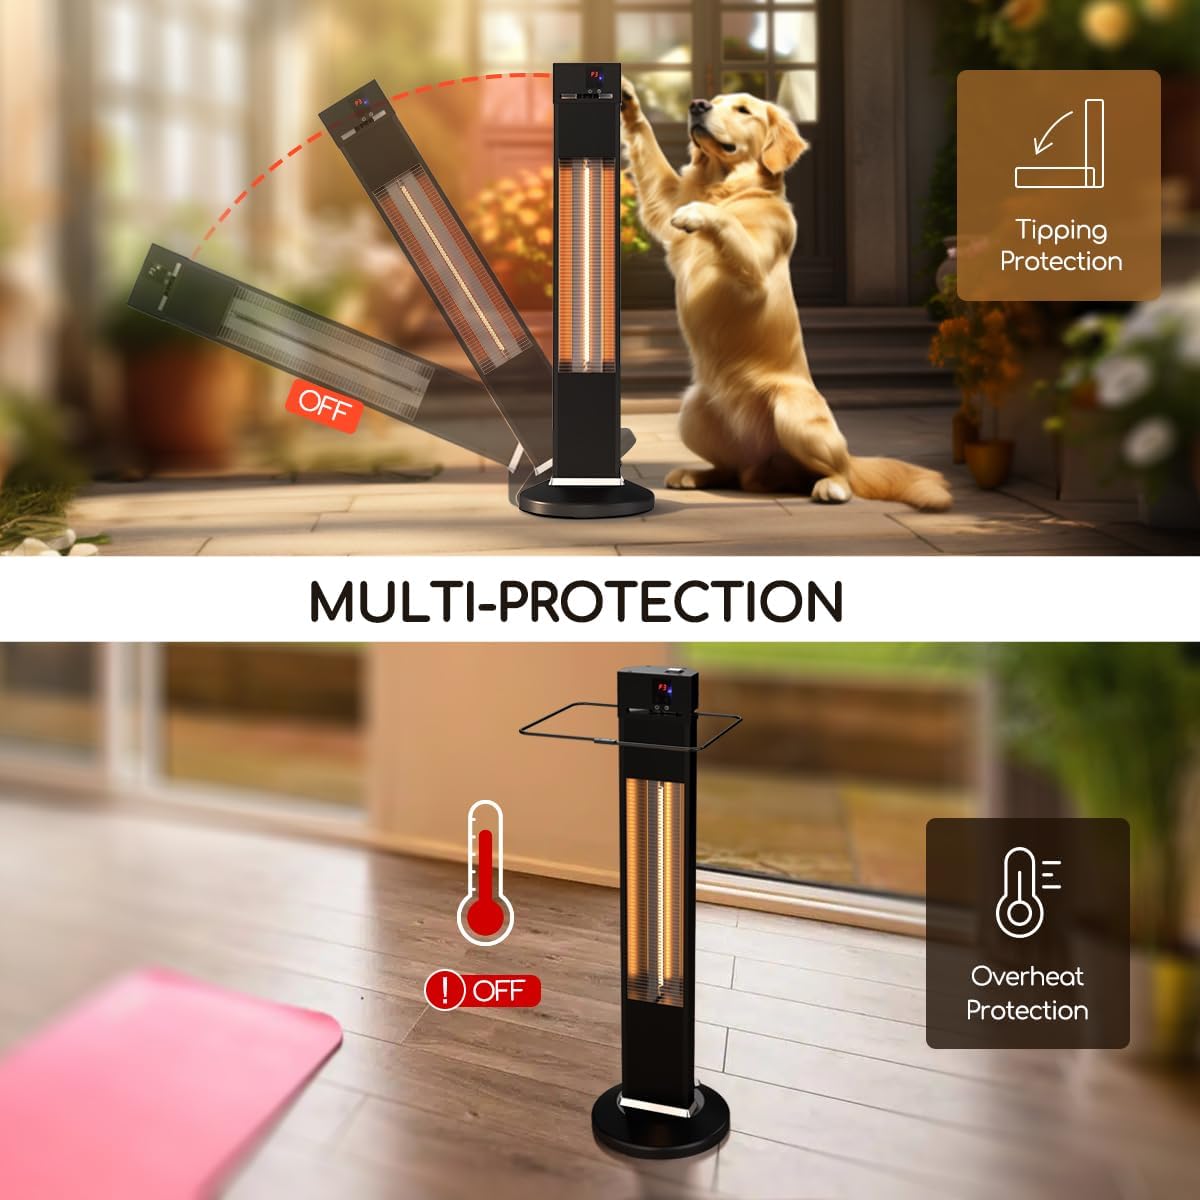 Portable Waterproof Tower Space Heater for Bathroom, Office, Garage, Backyard, 1500W Carbon Fiber Tub Electric Heater with 24H Timers, 3 Heat Levels Tip-Over and Overheat Protection Remot